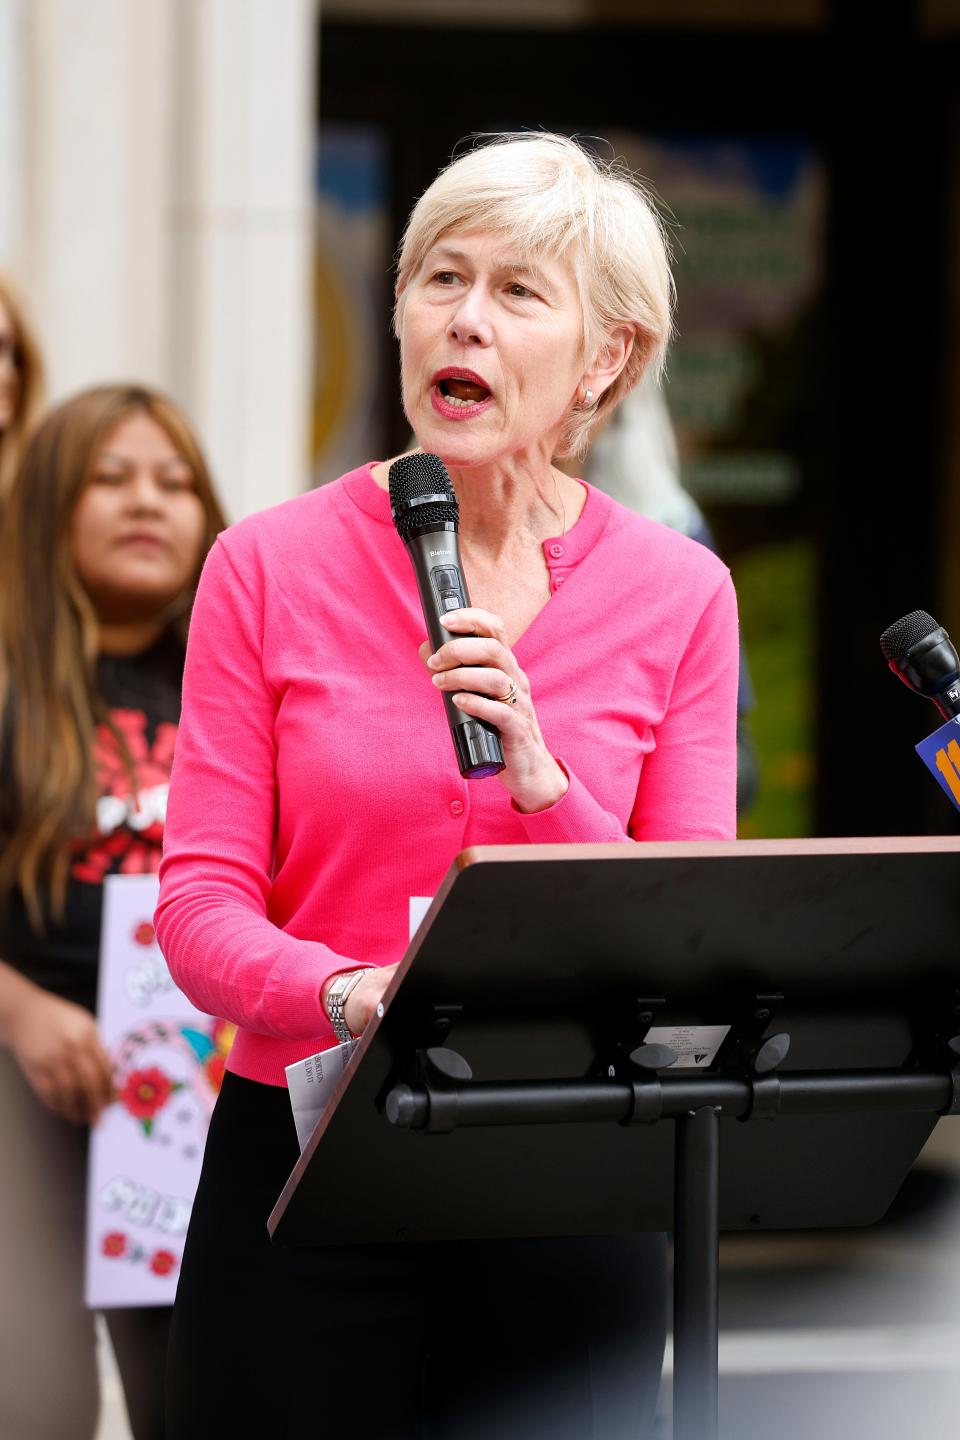 U.S. Rep. Deborah Ross, D-N.C., speaks at a rally at Bicentennial Plaza put on by Planned Parenthood South Atlantic in response to a bill before the North Carolina Legislature, Wednesday, May 3, 2023, in Raleigh, N.C. (AP Photo/Karl B DeBlaker)